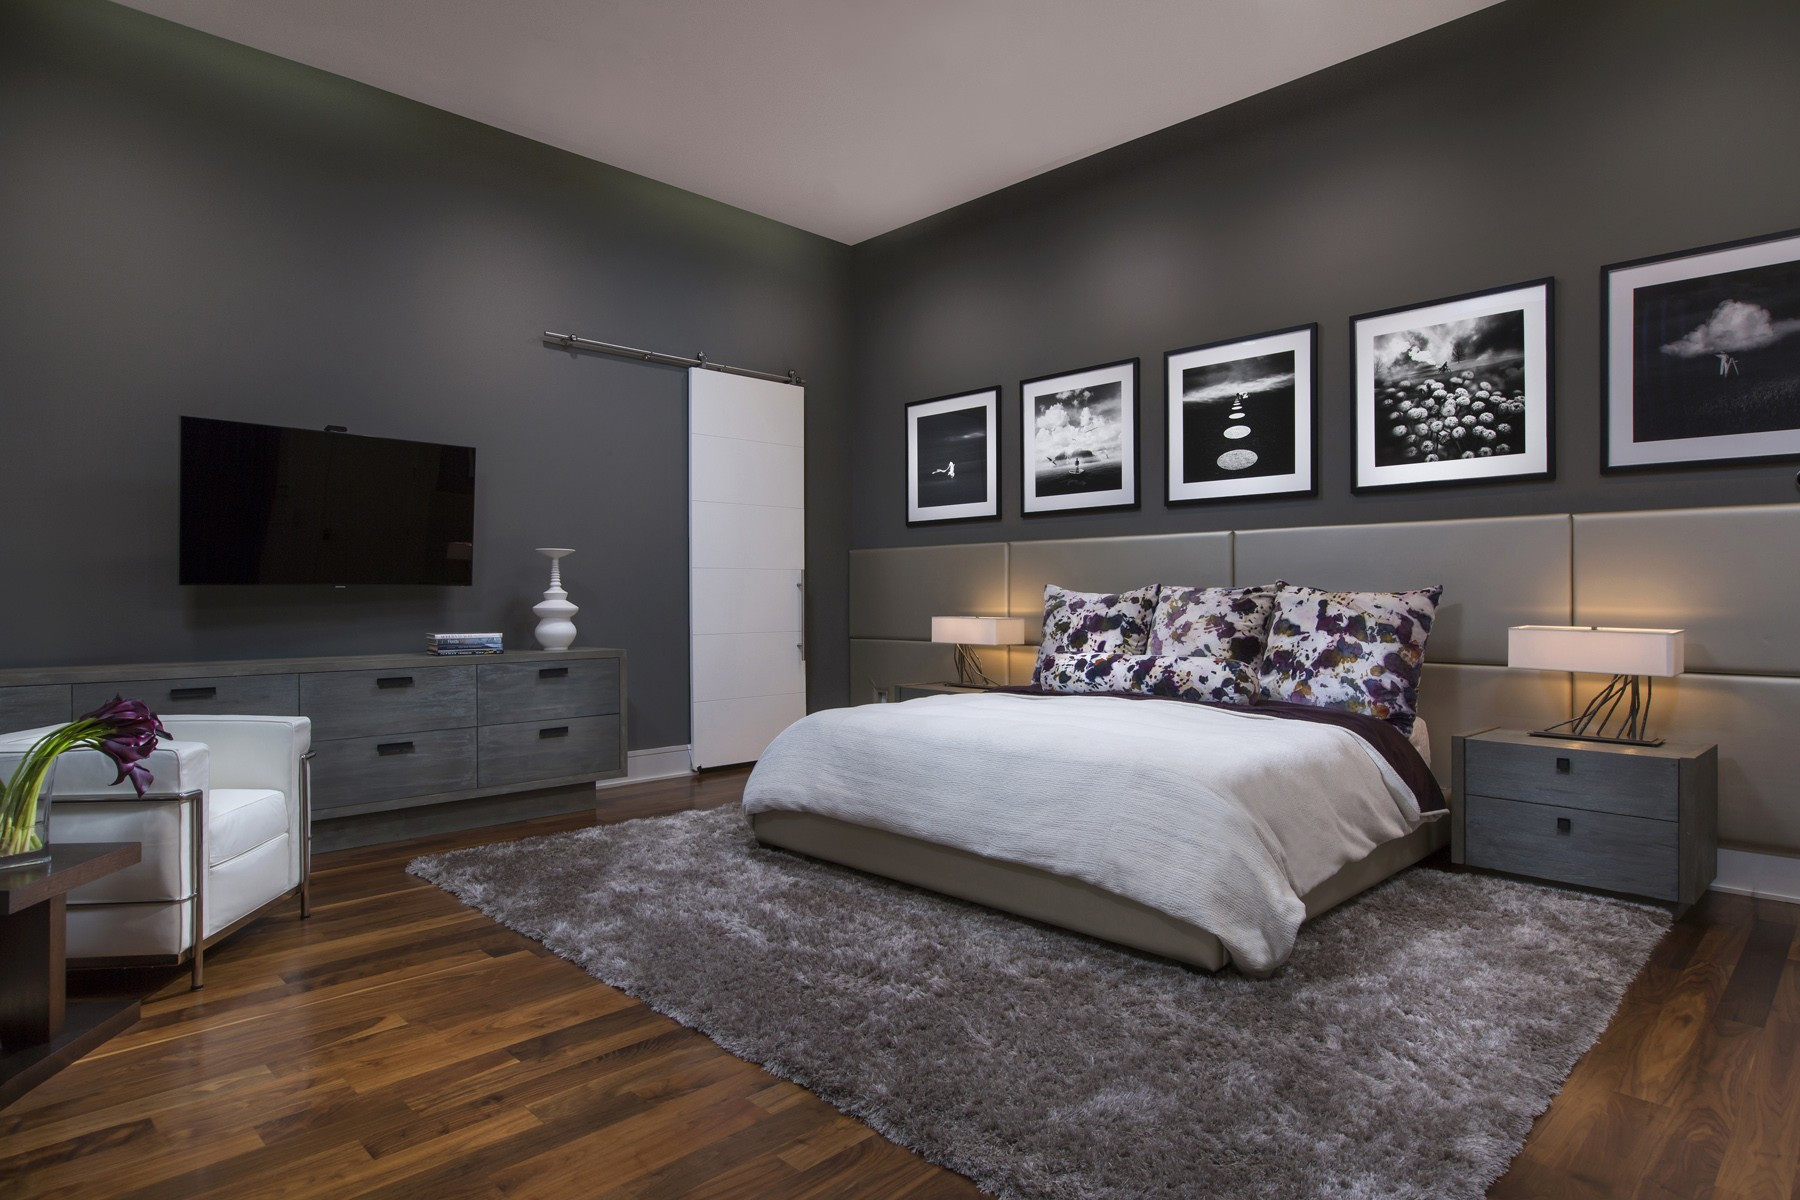 Modern Bedroom Paint Colors
 Modern Interior Paint Trends For 2018